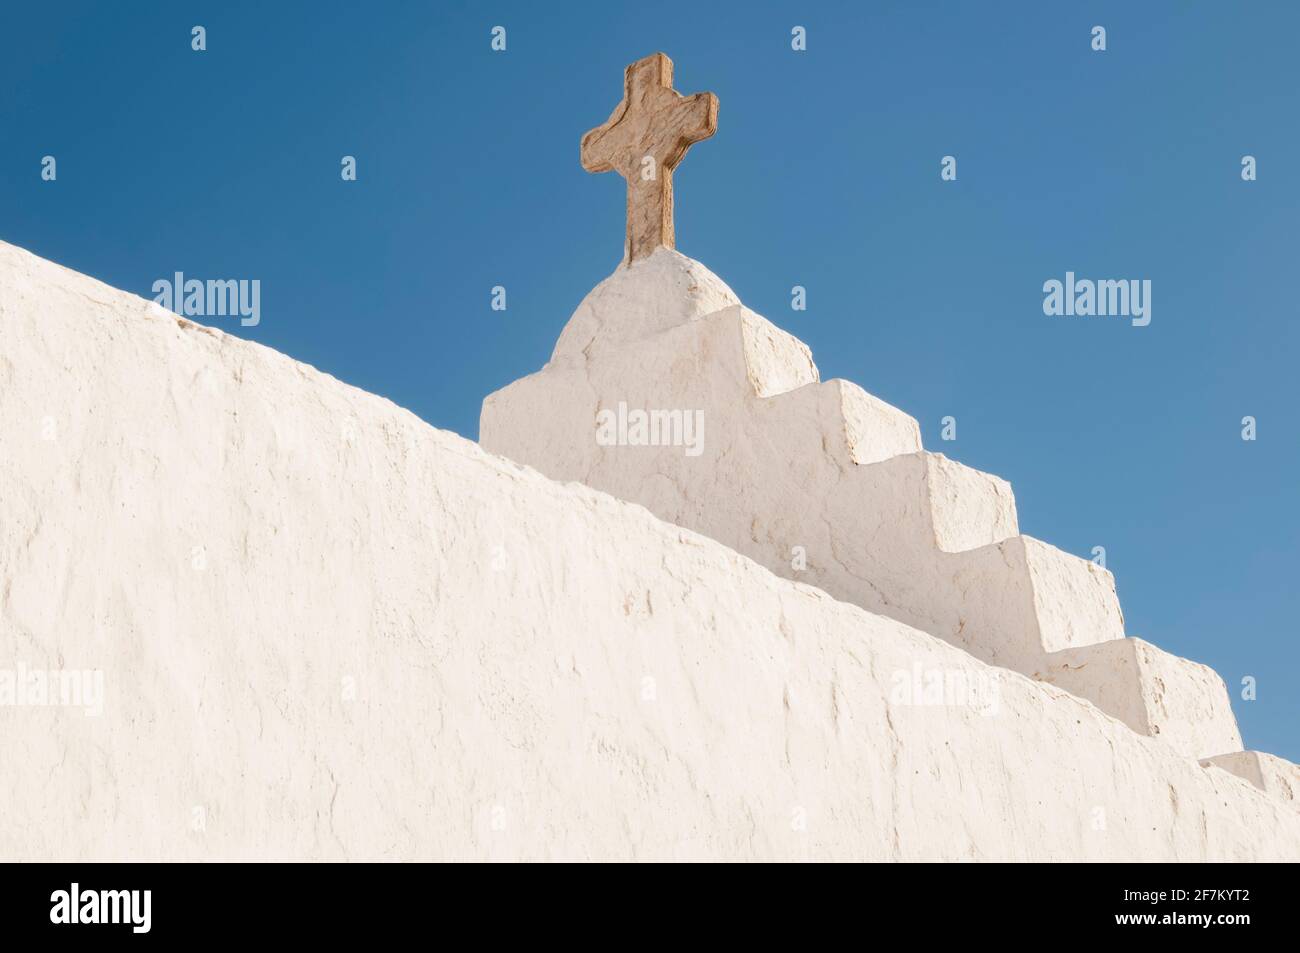 Close-up of a white roof, the exterior of a church with a stone cross, Greece, Cyclades Islands, Mykonos. Blue sky in the background. Concept travel Stock Photo